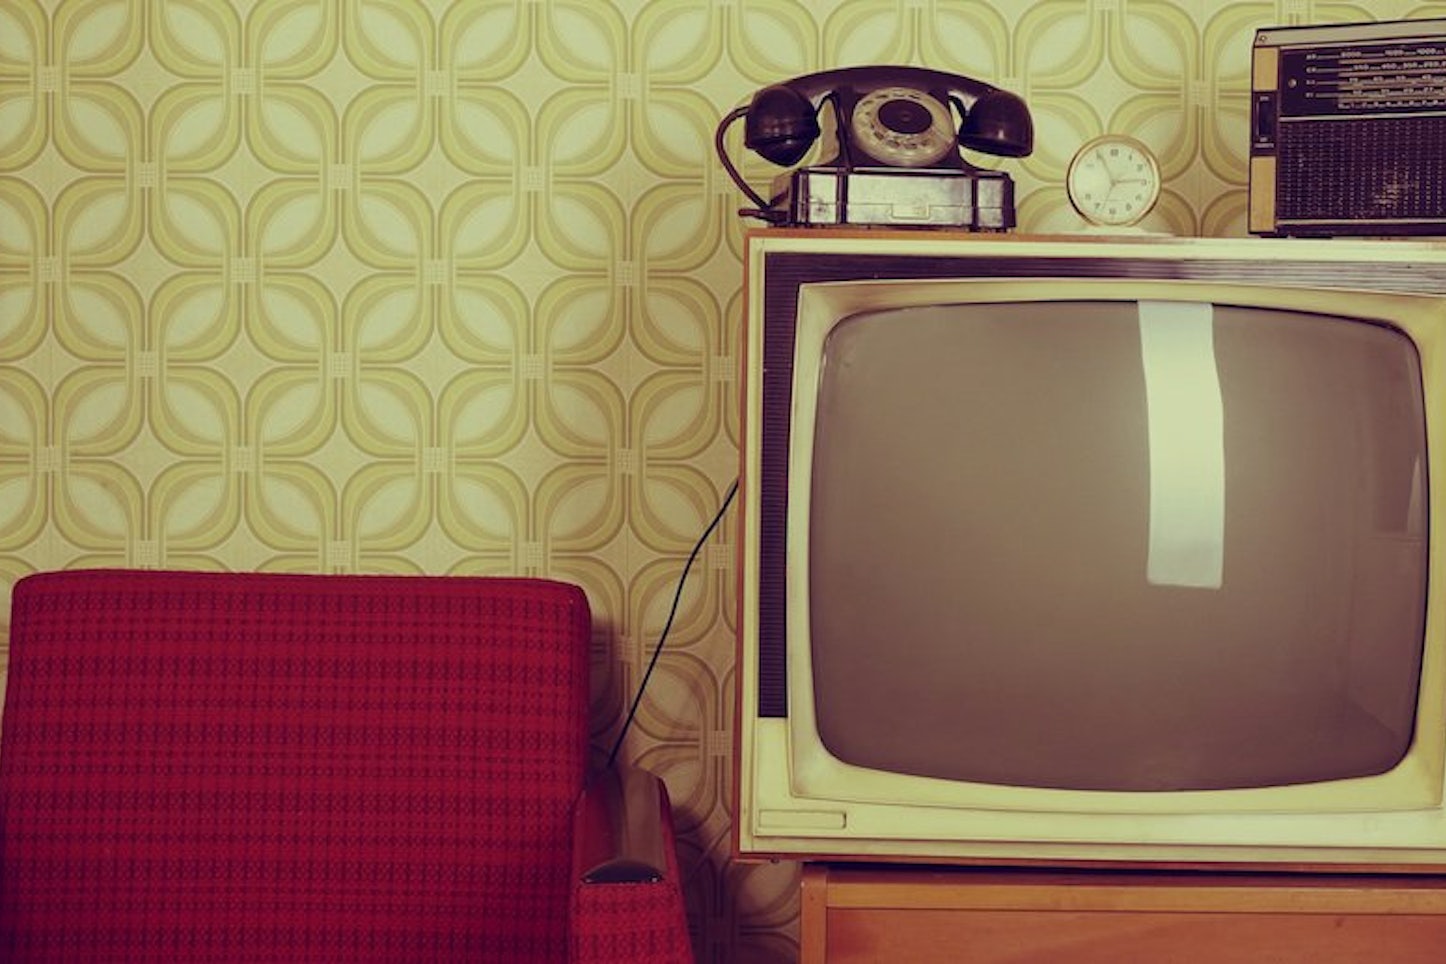 TV Lawyers: The Good, The Bad, And The Revolutionary | The New Republic